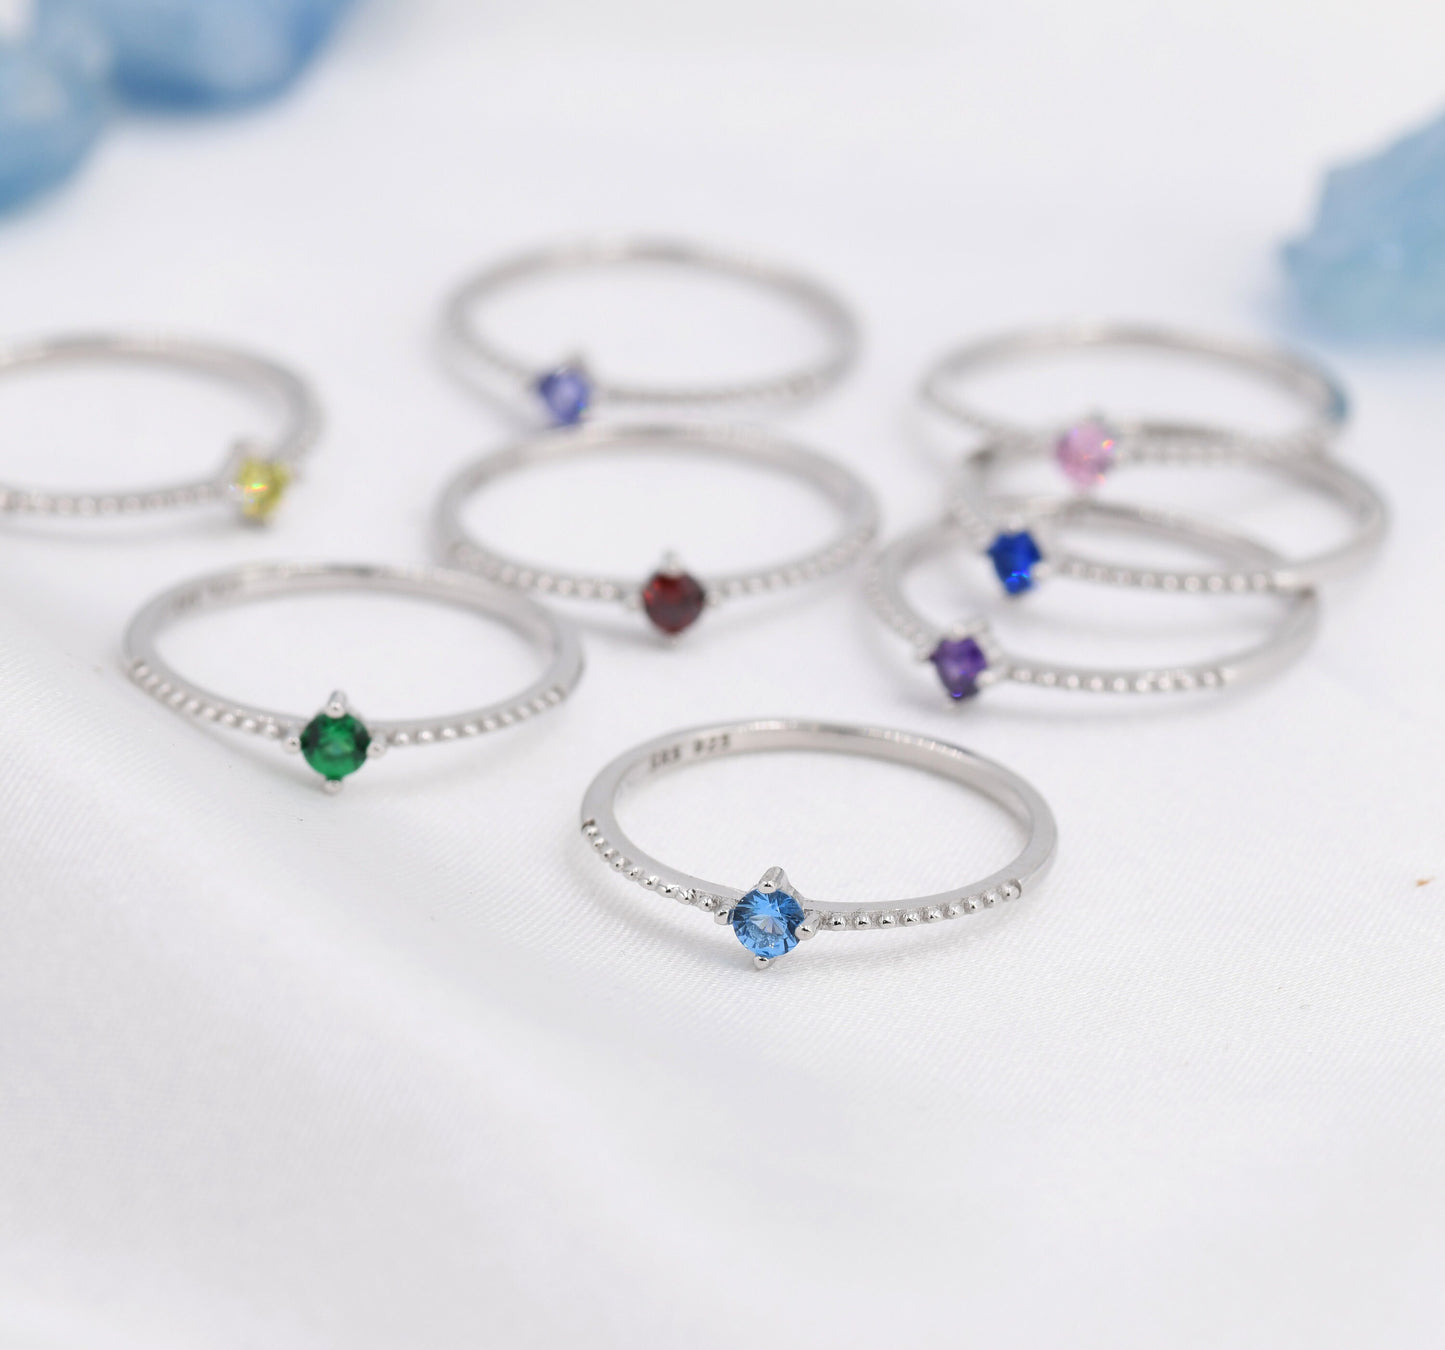 Birthstone CZ Ring in Sterling Silver, Silver or Gold, Delicate Stacking Ring, Nesting Band, Size US 6 - 8